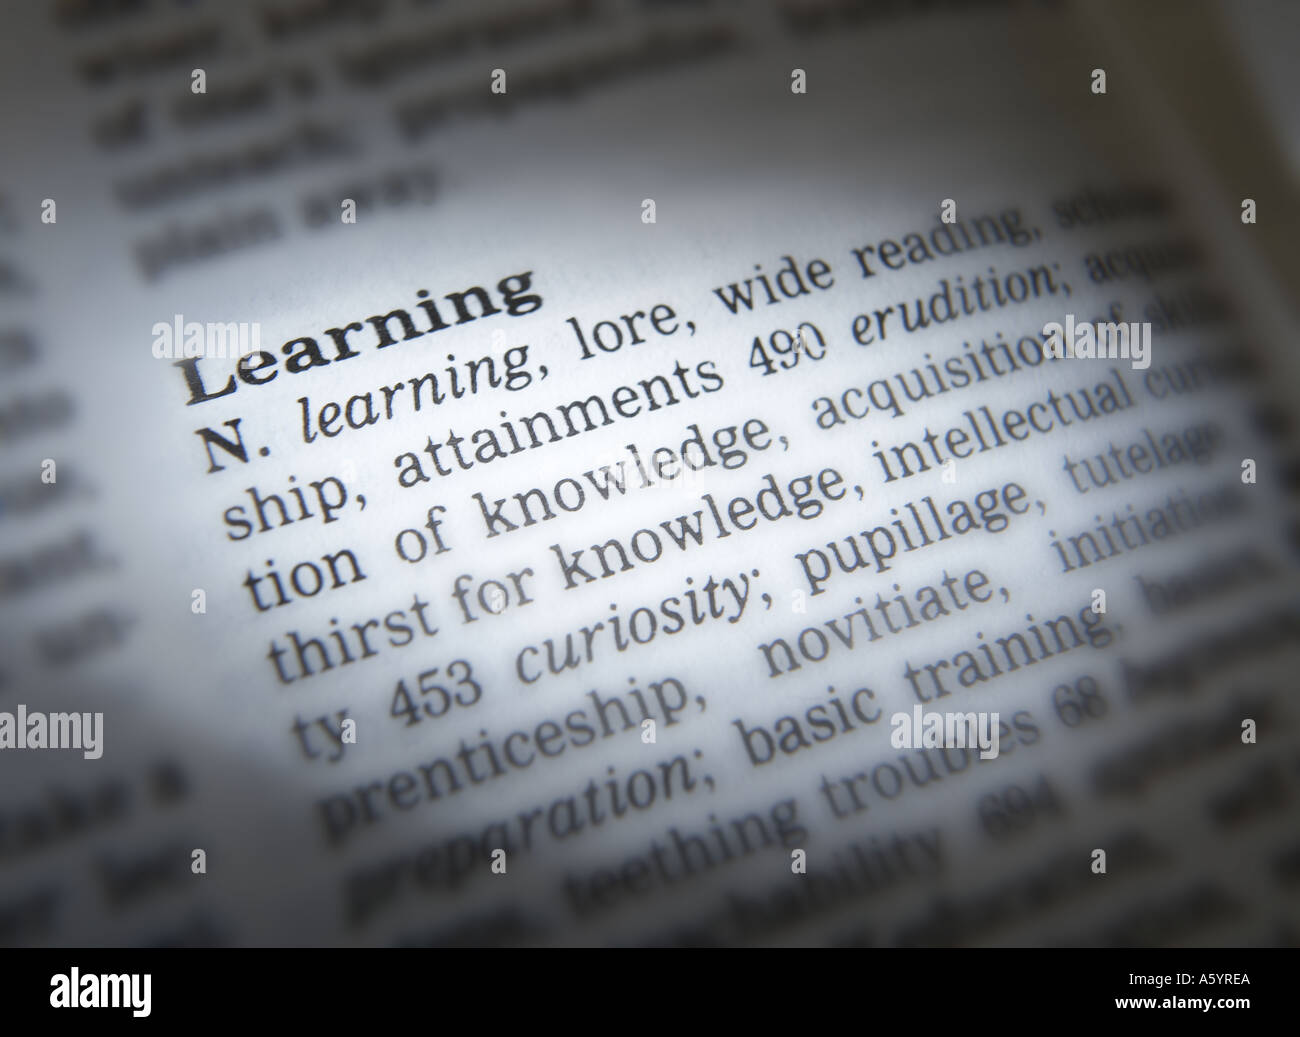 THESAURUS PAGE SHOWING DEFINITION OF WORD LEARNING Stock Photo